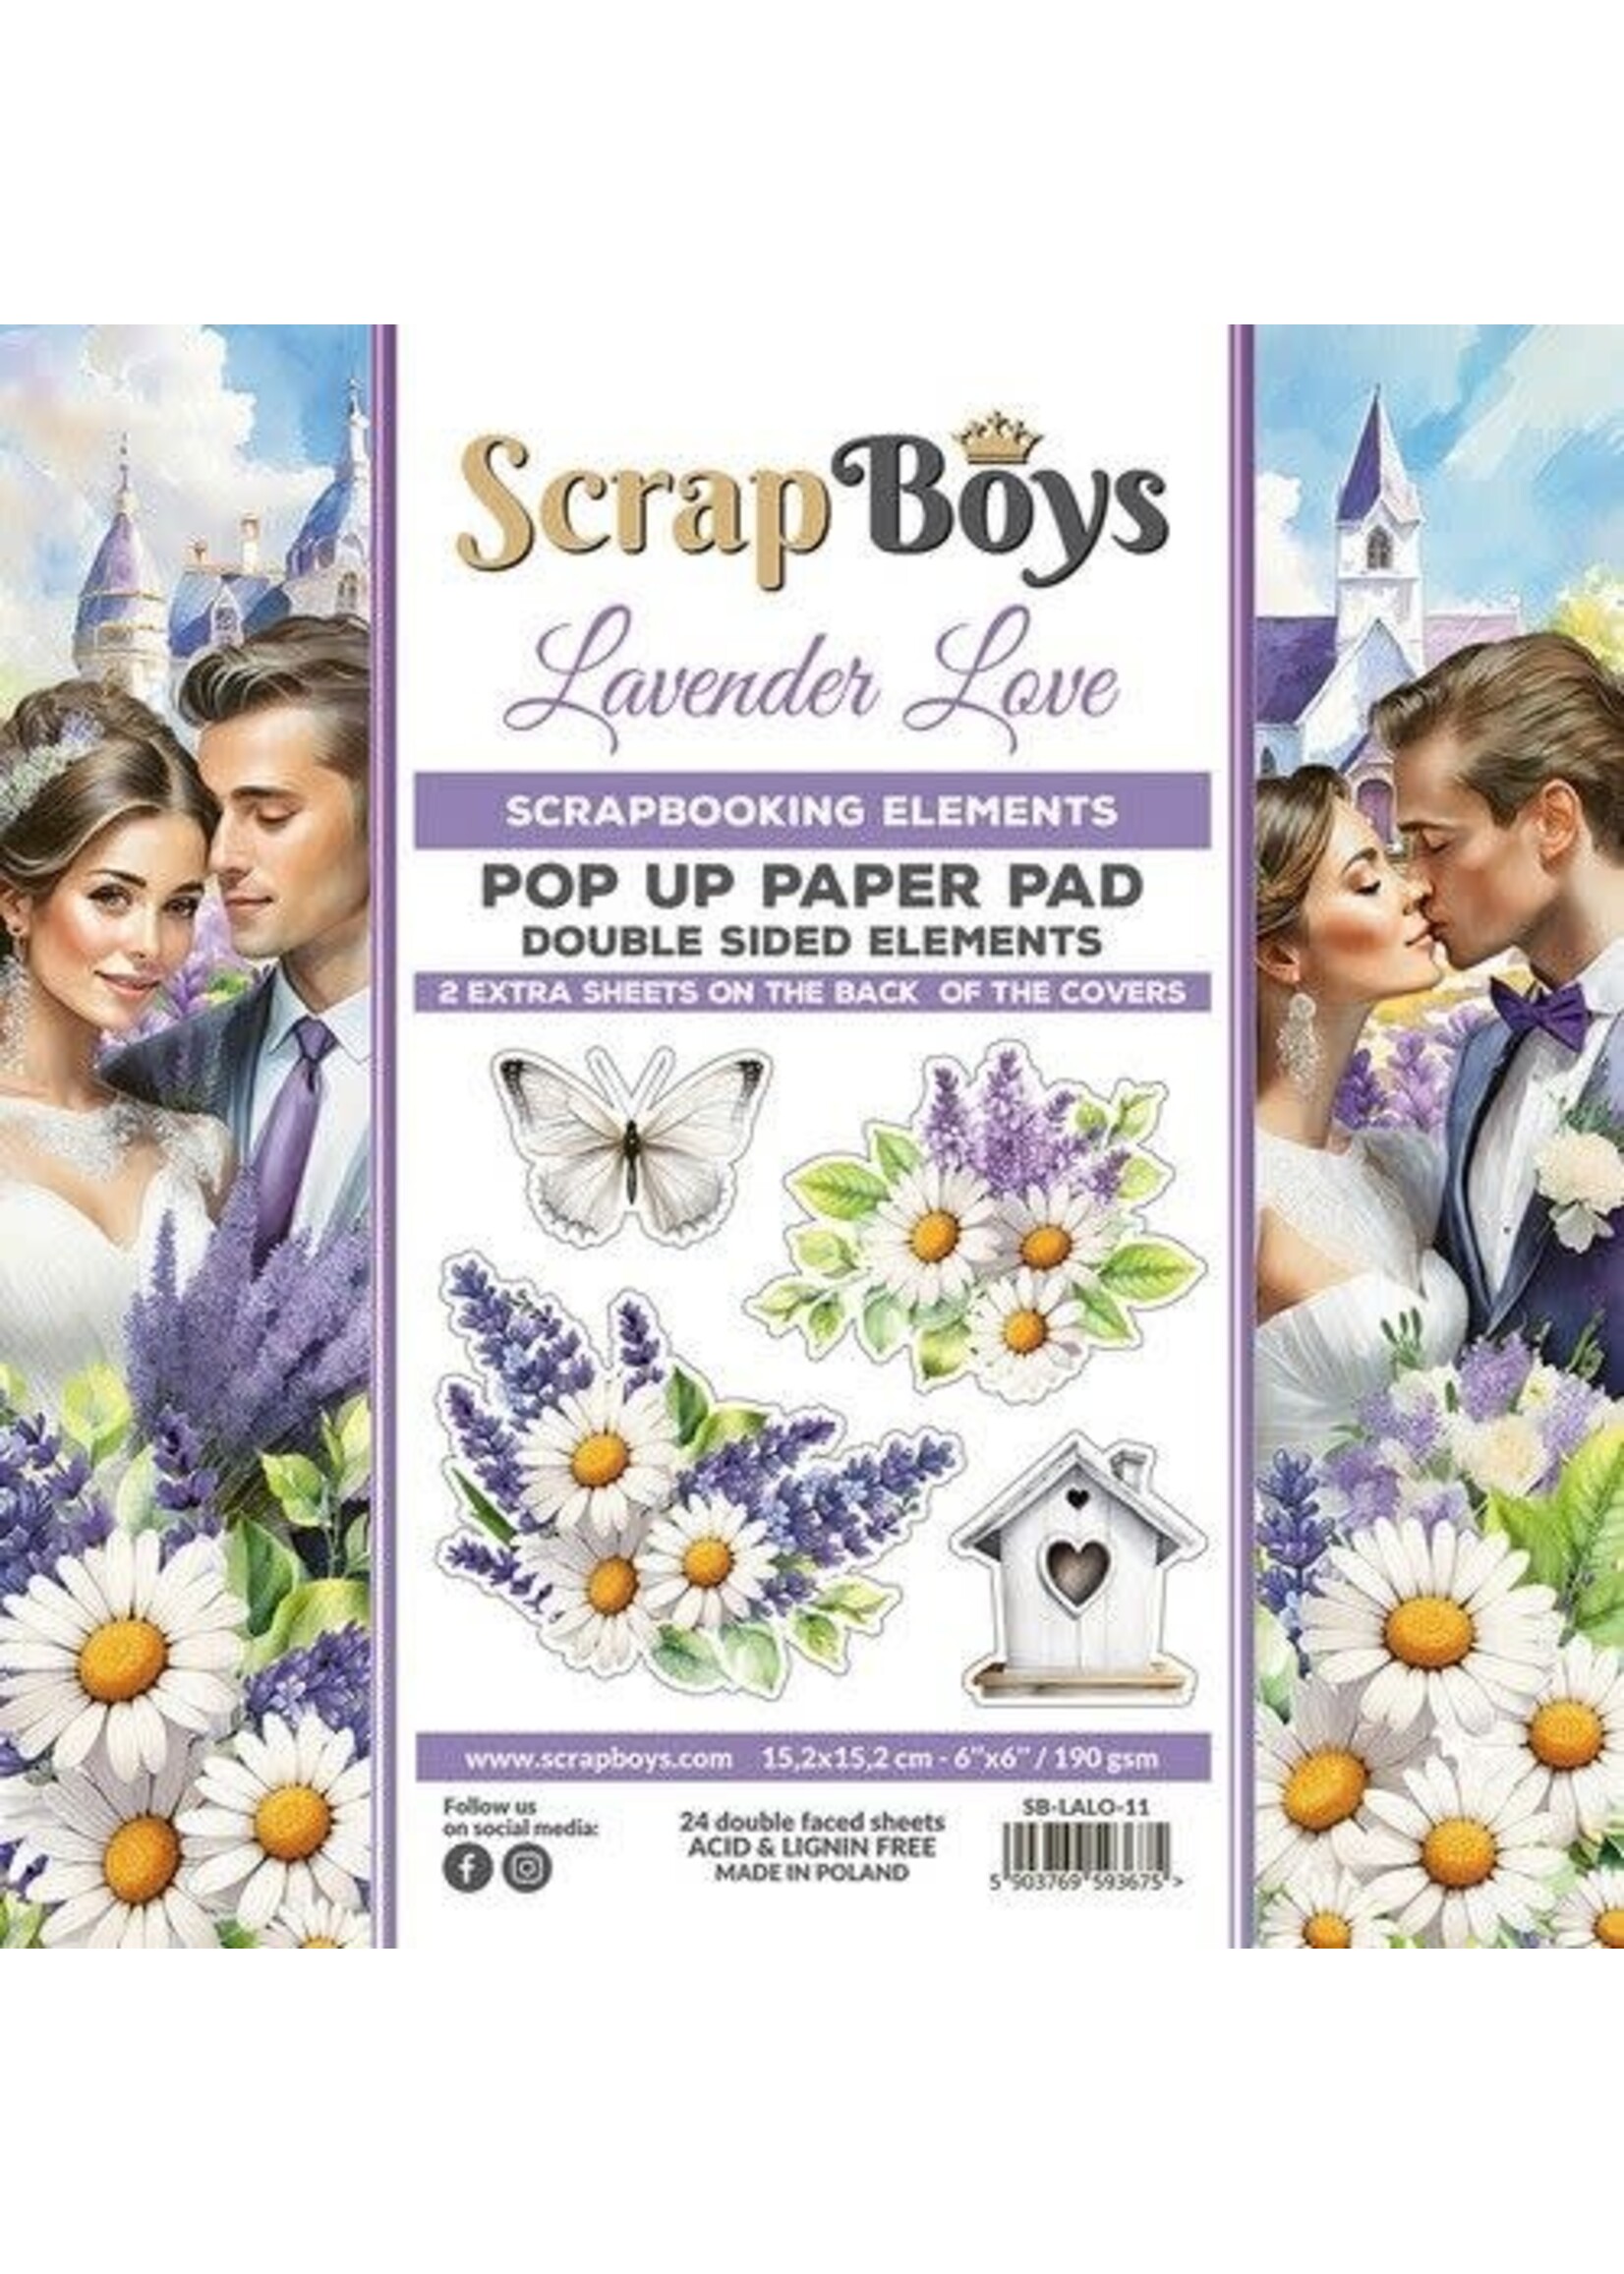 Scrapboys POP UP Paperpad double sided elements - Lavender Love SB-LALO-11